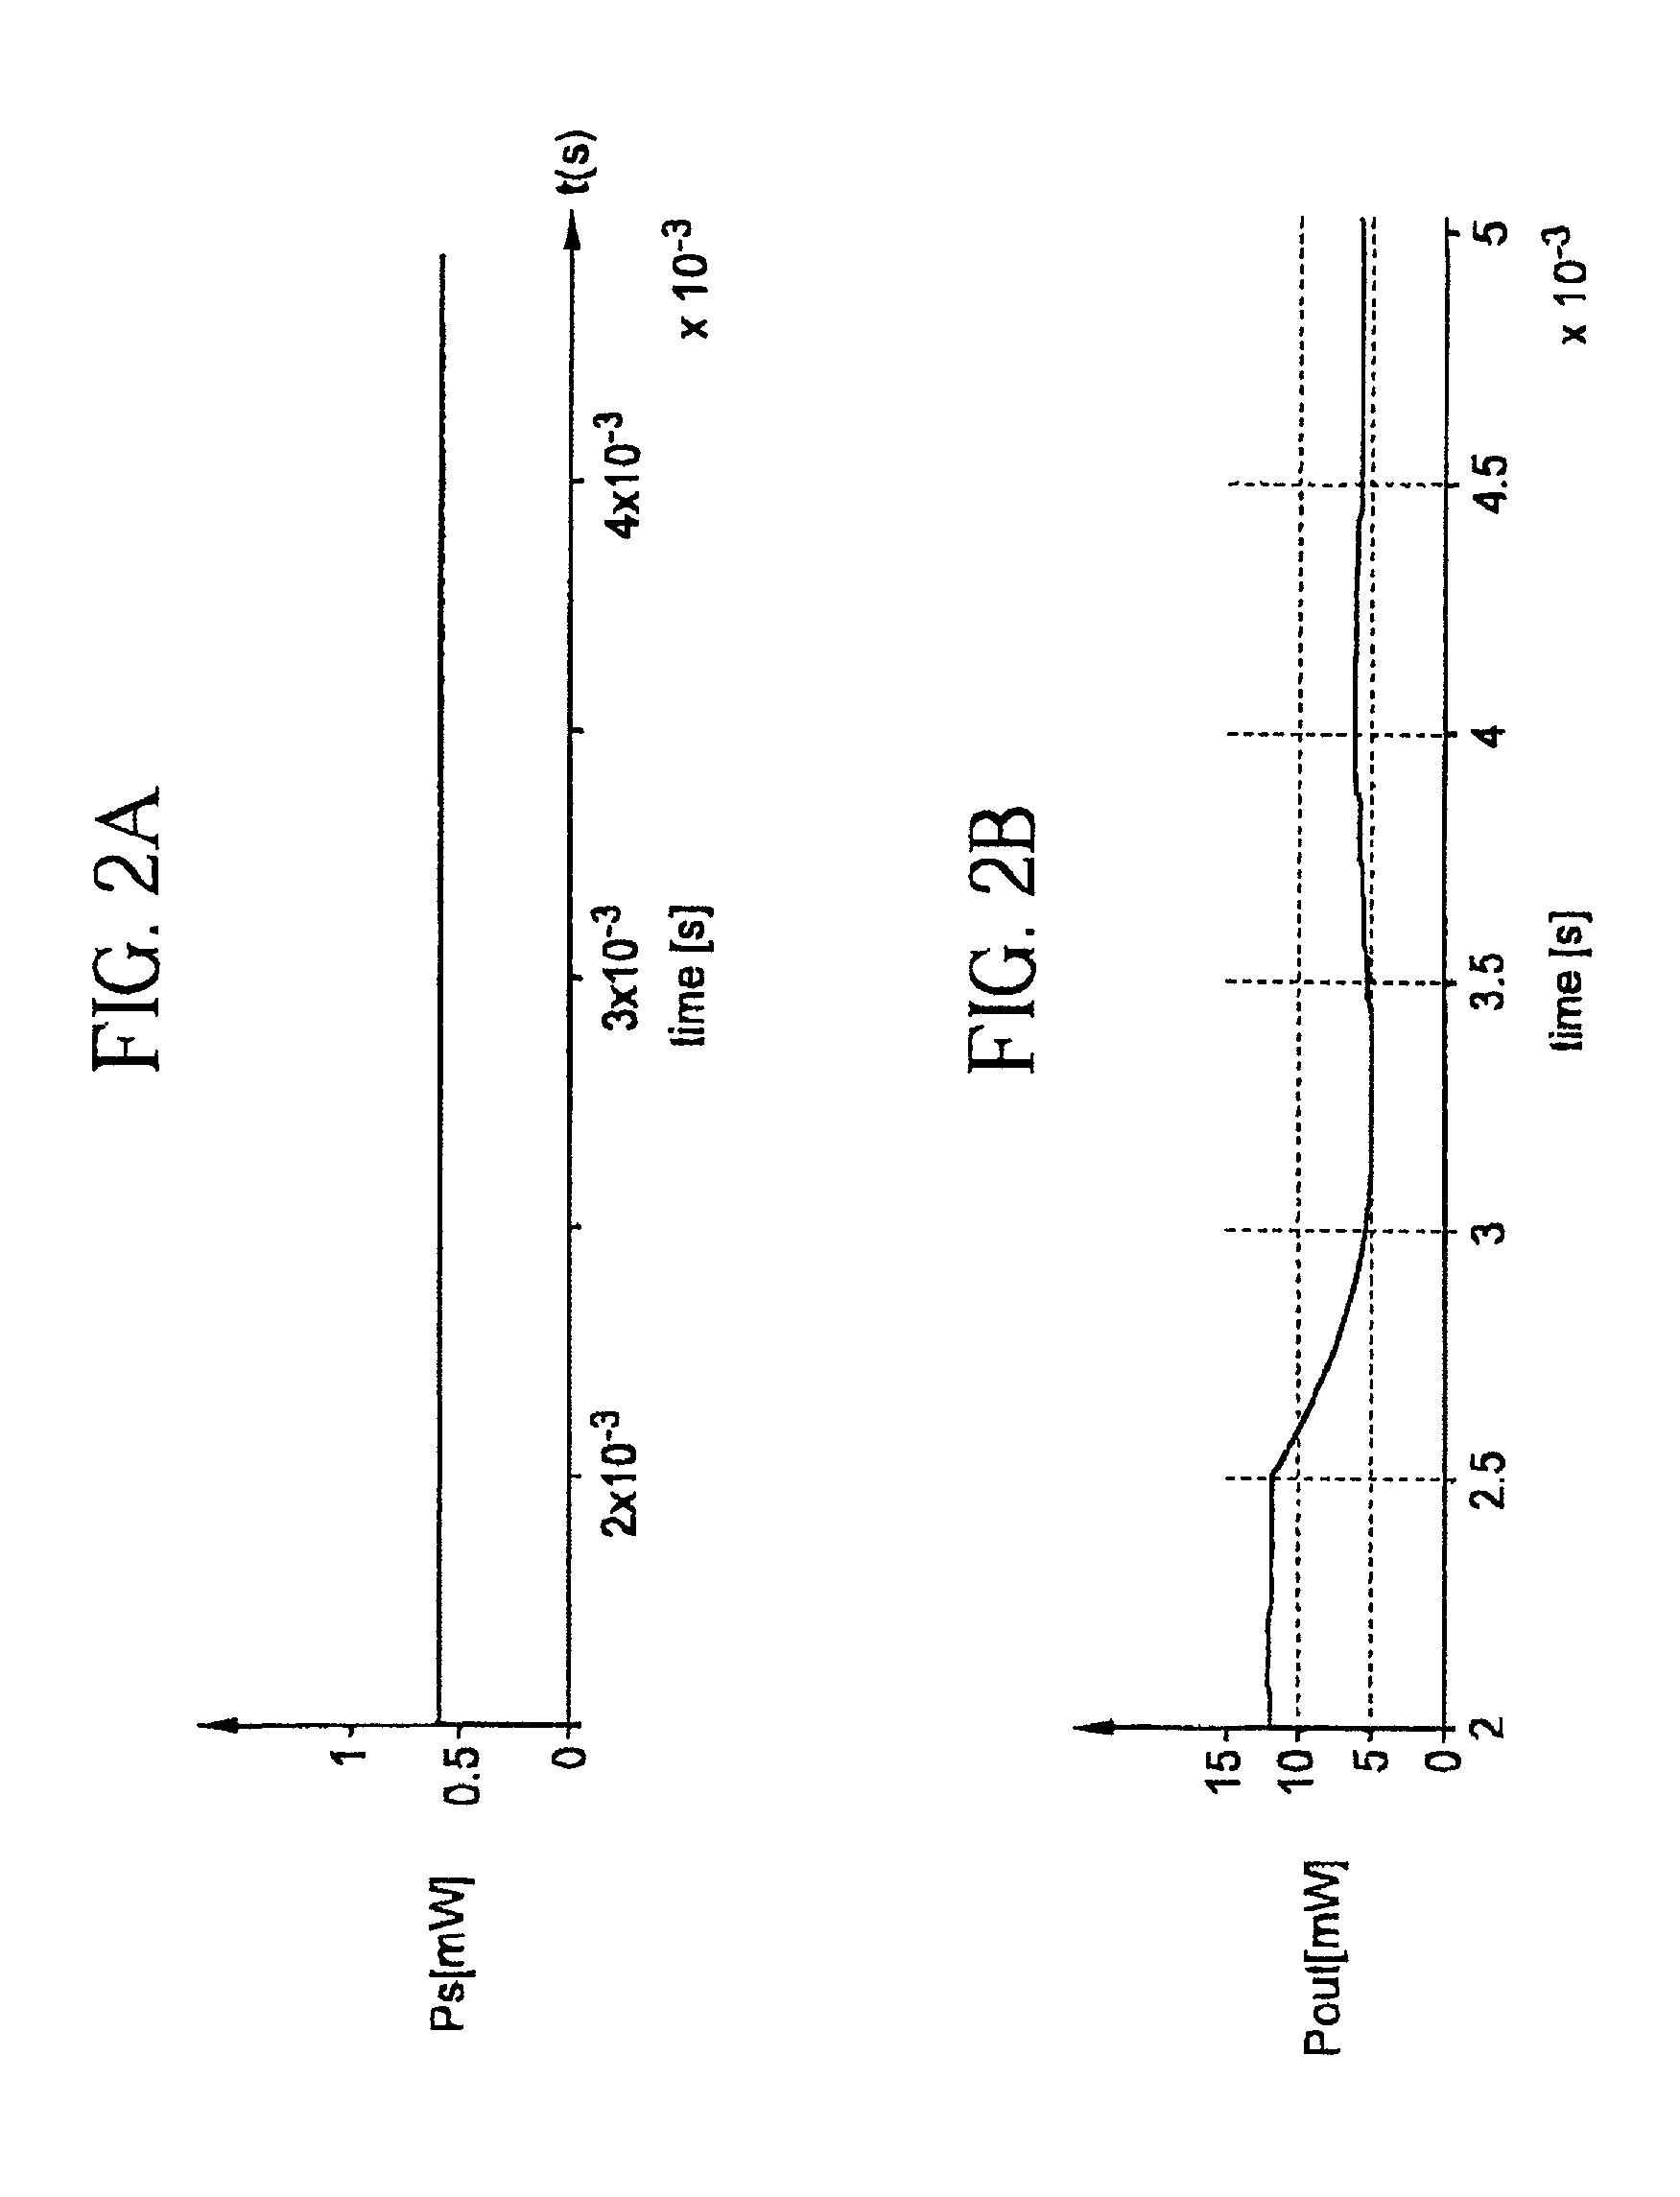 Optical amplifiers with a simple gain/output control device